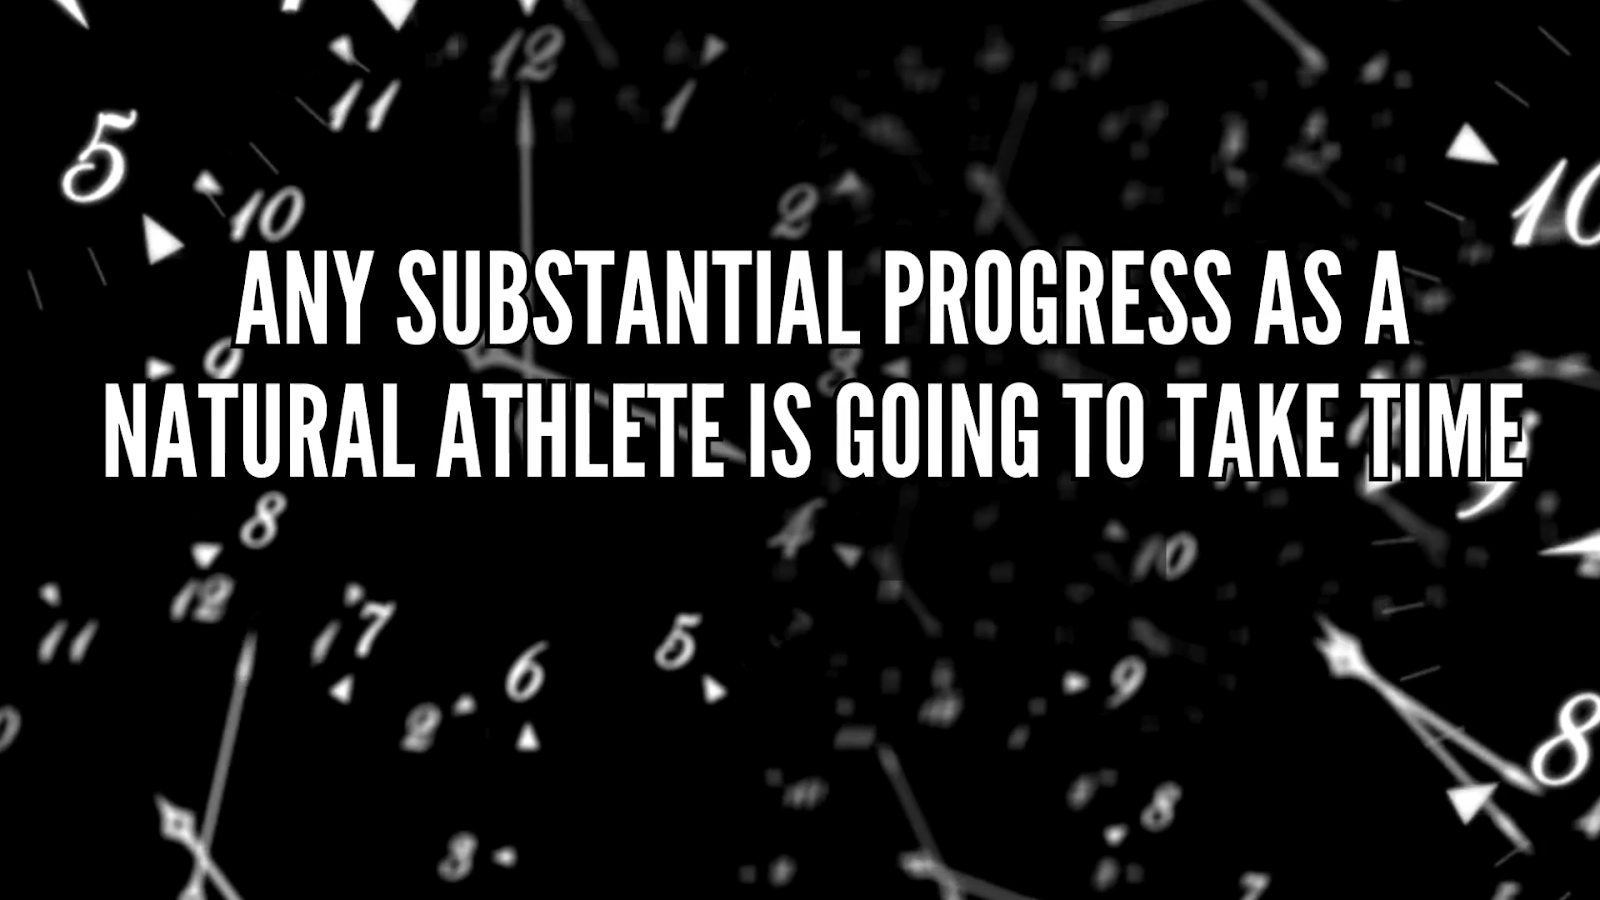 Substantial progress for natural athletes takes a long time